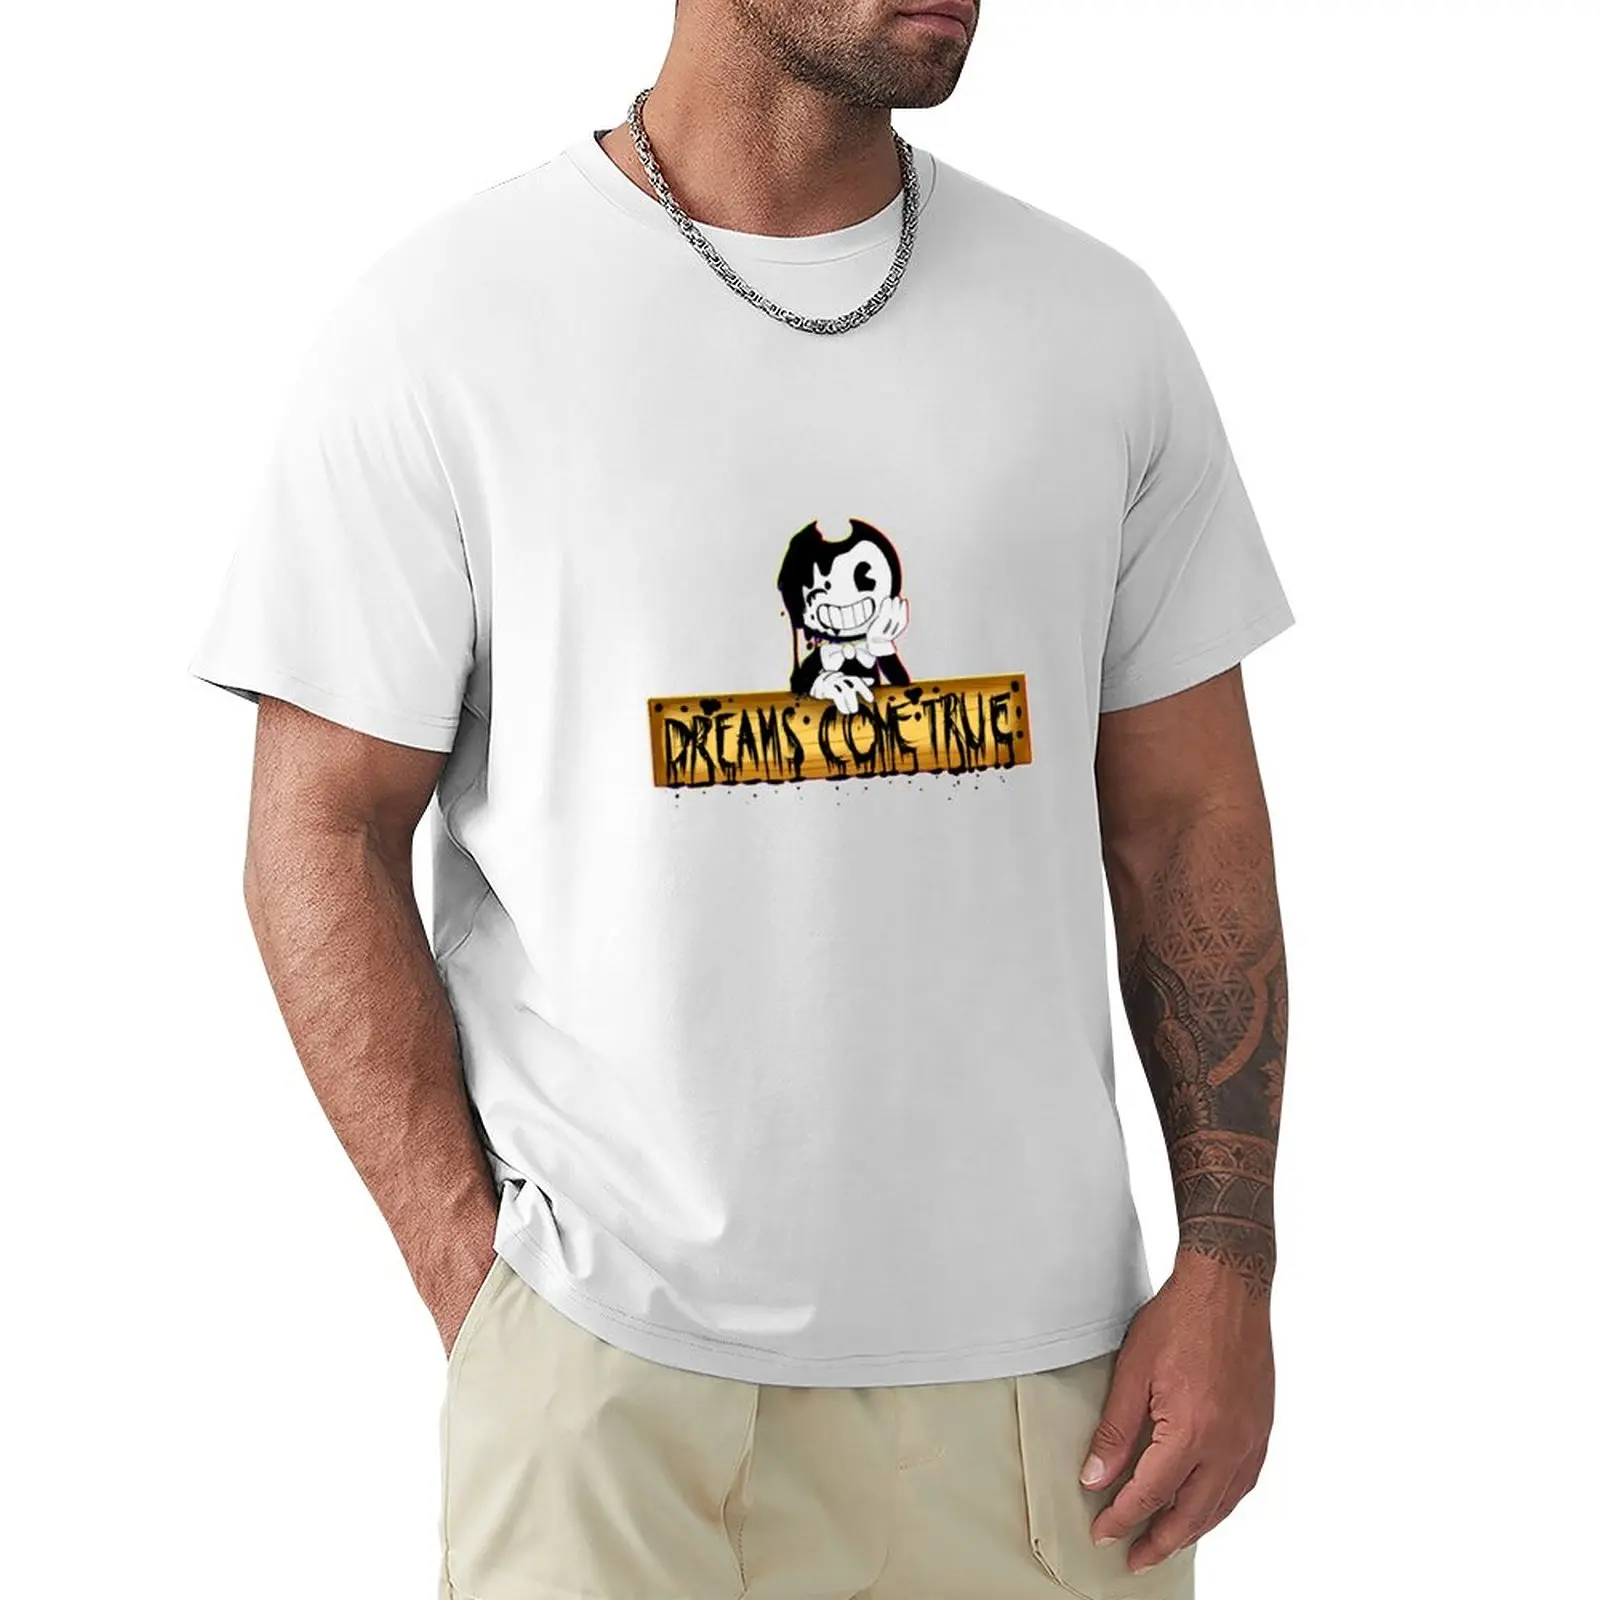 

Bendy DREAMS COME TRUE funny T-Shirt customs design your own boys whites Short sleeve tee t shirts for men graphic